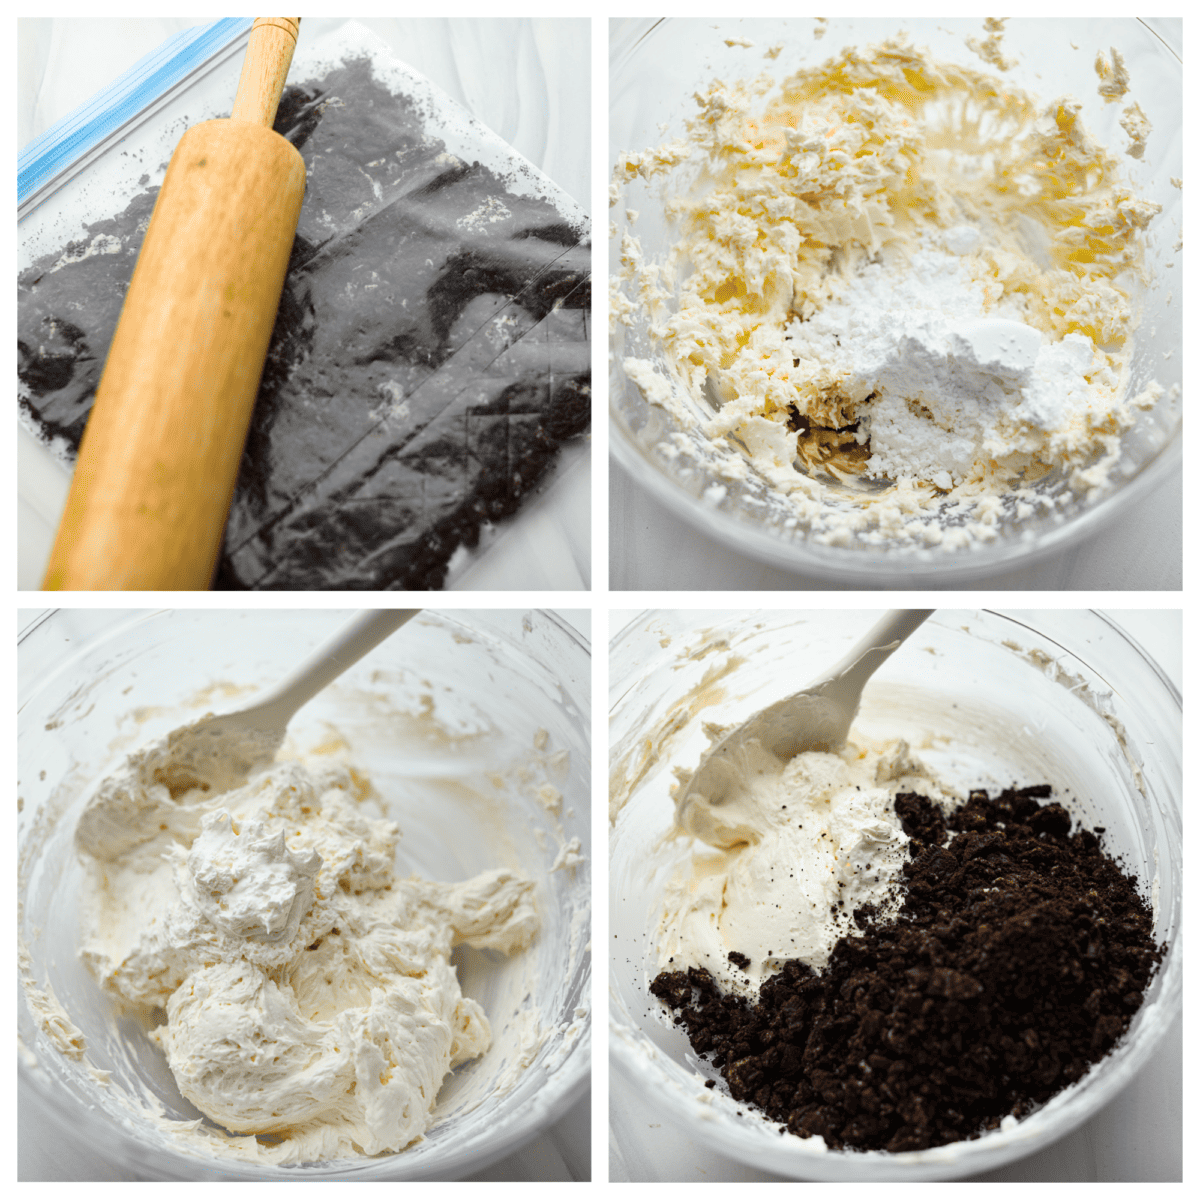 4-photo collage of the Oreos being crushed, and the dip ingredients being mixed together.